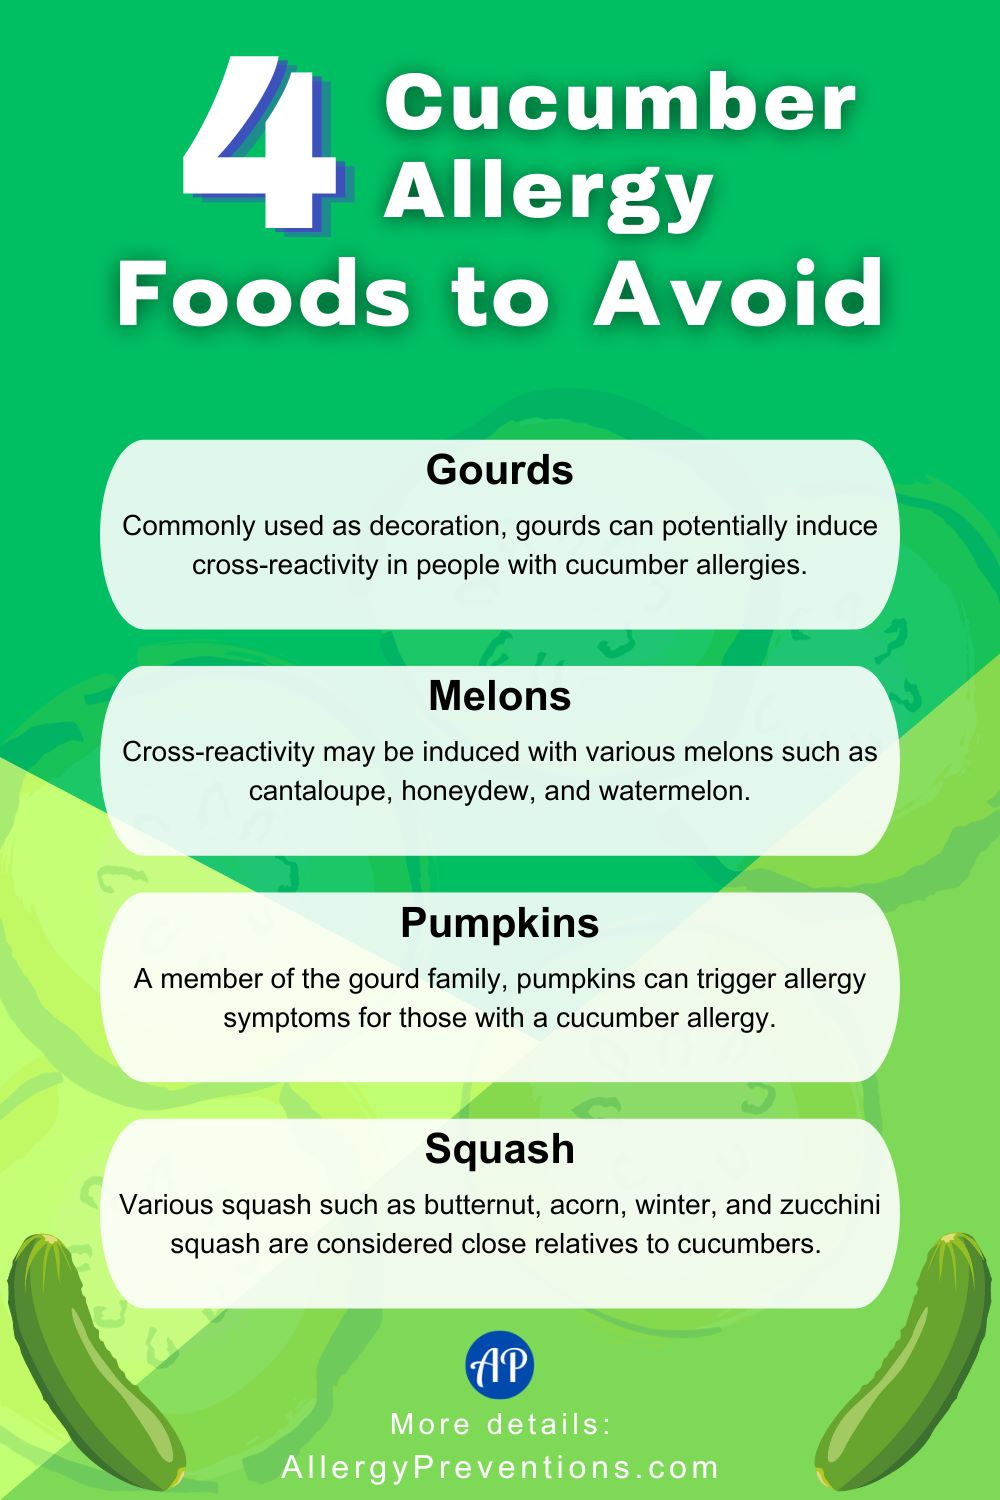 Cucumber allergy foods to avoid infographic. Foods to avoid with allergies to cucumbers. 1. Gourds: Commonly used as decoration, gourds can potentially induce cross-reactivity in people with cucumber allergies. 2. Melons: Cross-reactivity may be induced with various melons such as cantaloupe, honeydew, and watermelon. 3. Pumpkins: A member of the gourd family, pumpkins can trigger allergy symptoms for those with a cucumber allergy. 4. Squash: Various squash such as butternut, acorn, winter, and zucchini squash are considered close relatives to cucumbers.